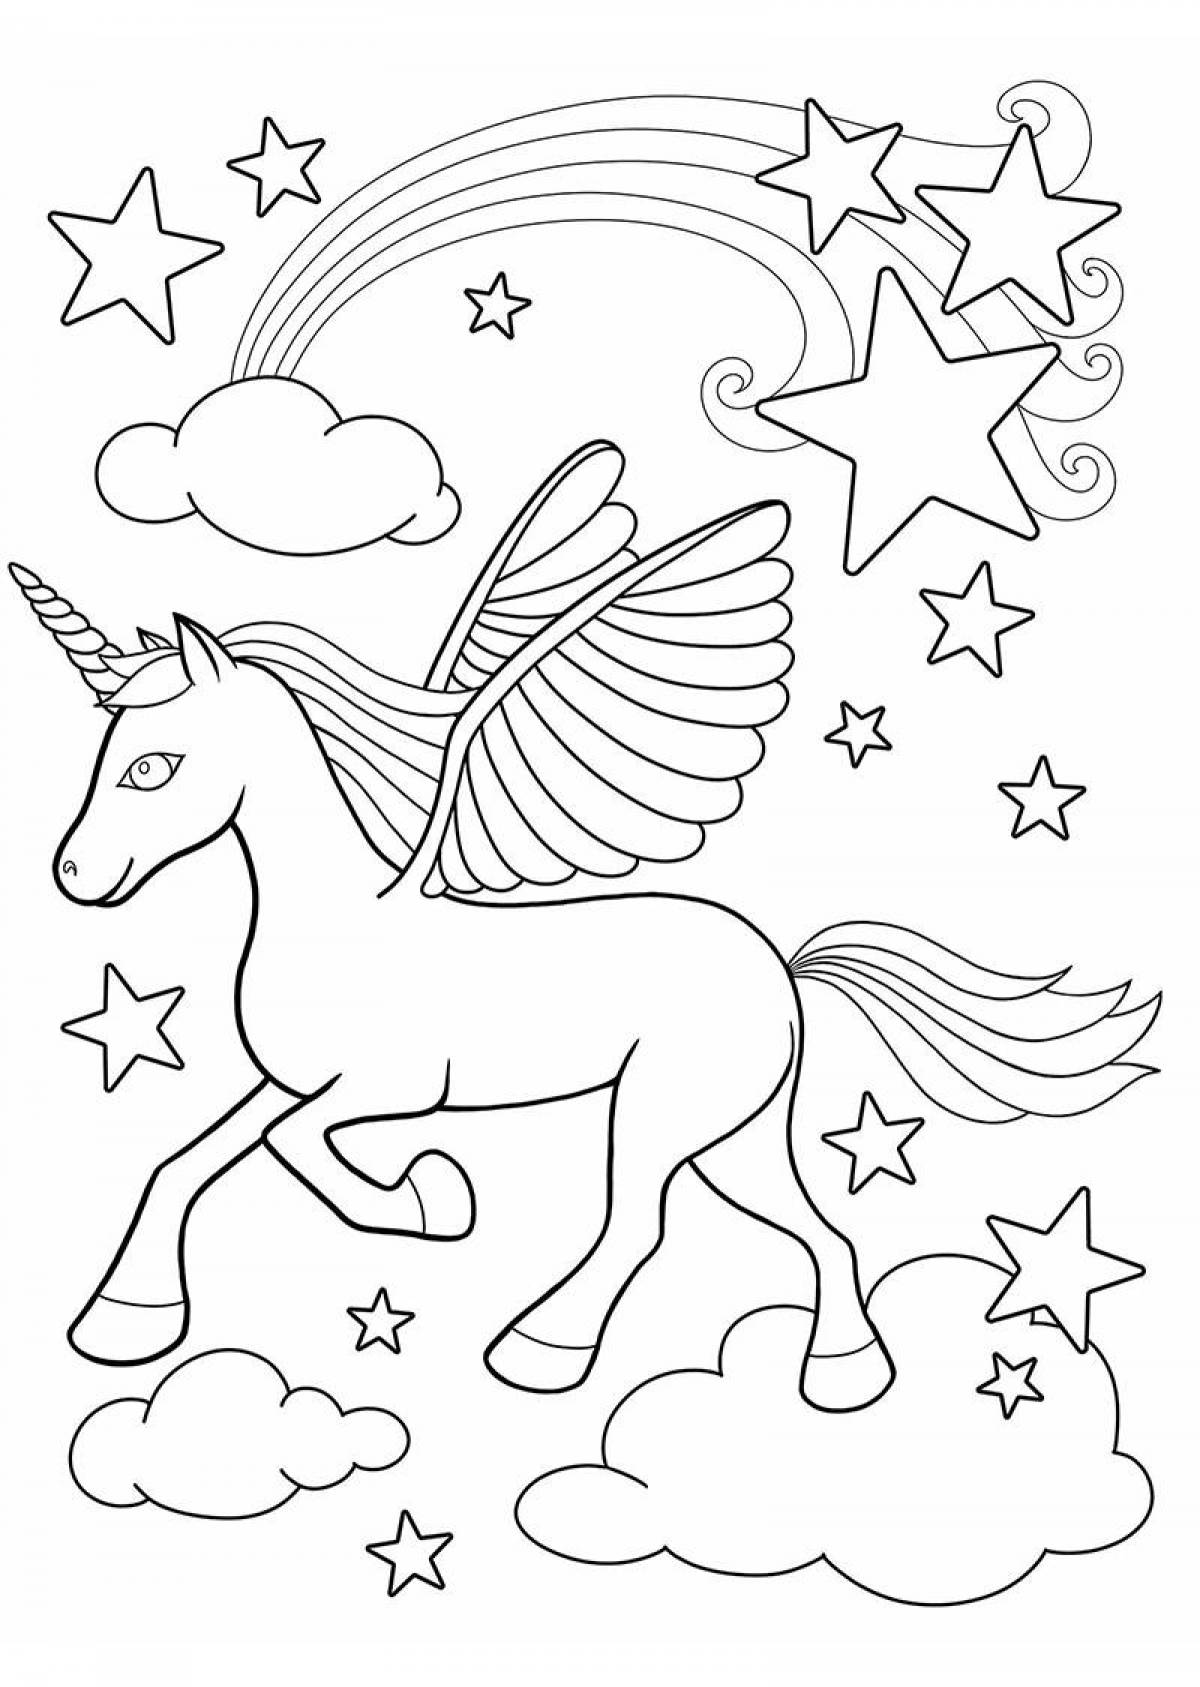 Fantastic unicorn coloring book for children 6-7 years old